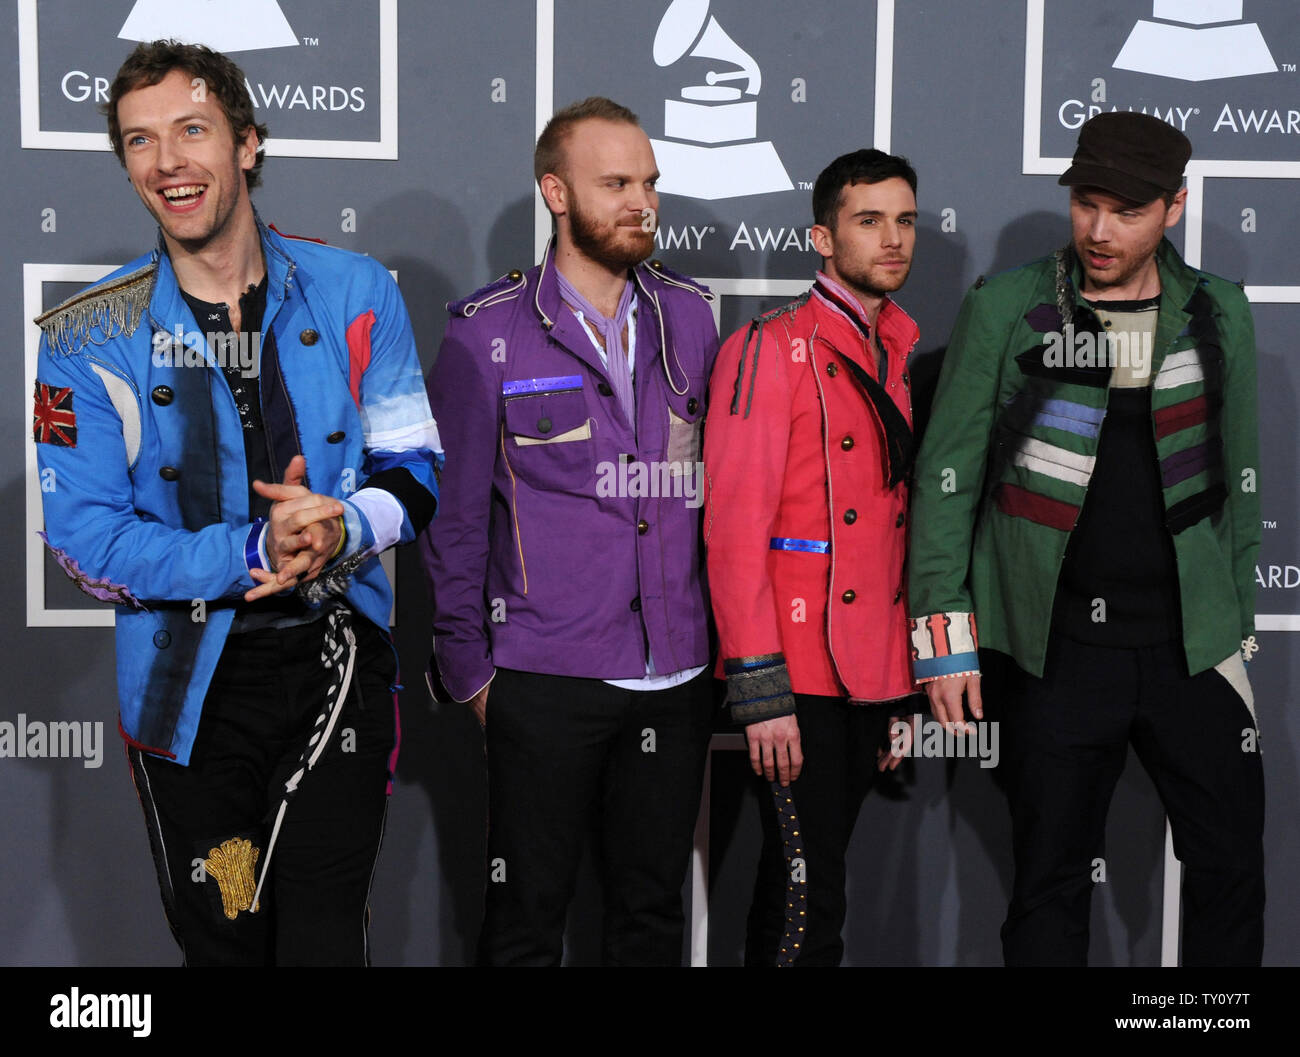 Coldplay band members arrive for the 51st annual Grammy Awards at